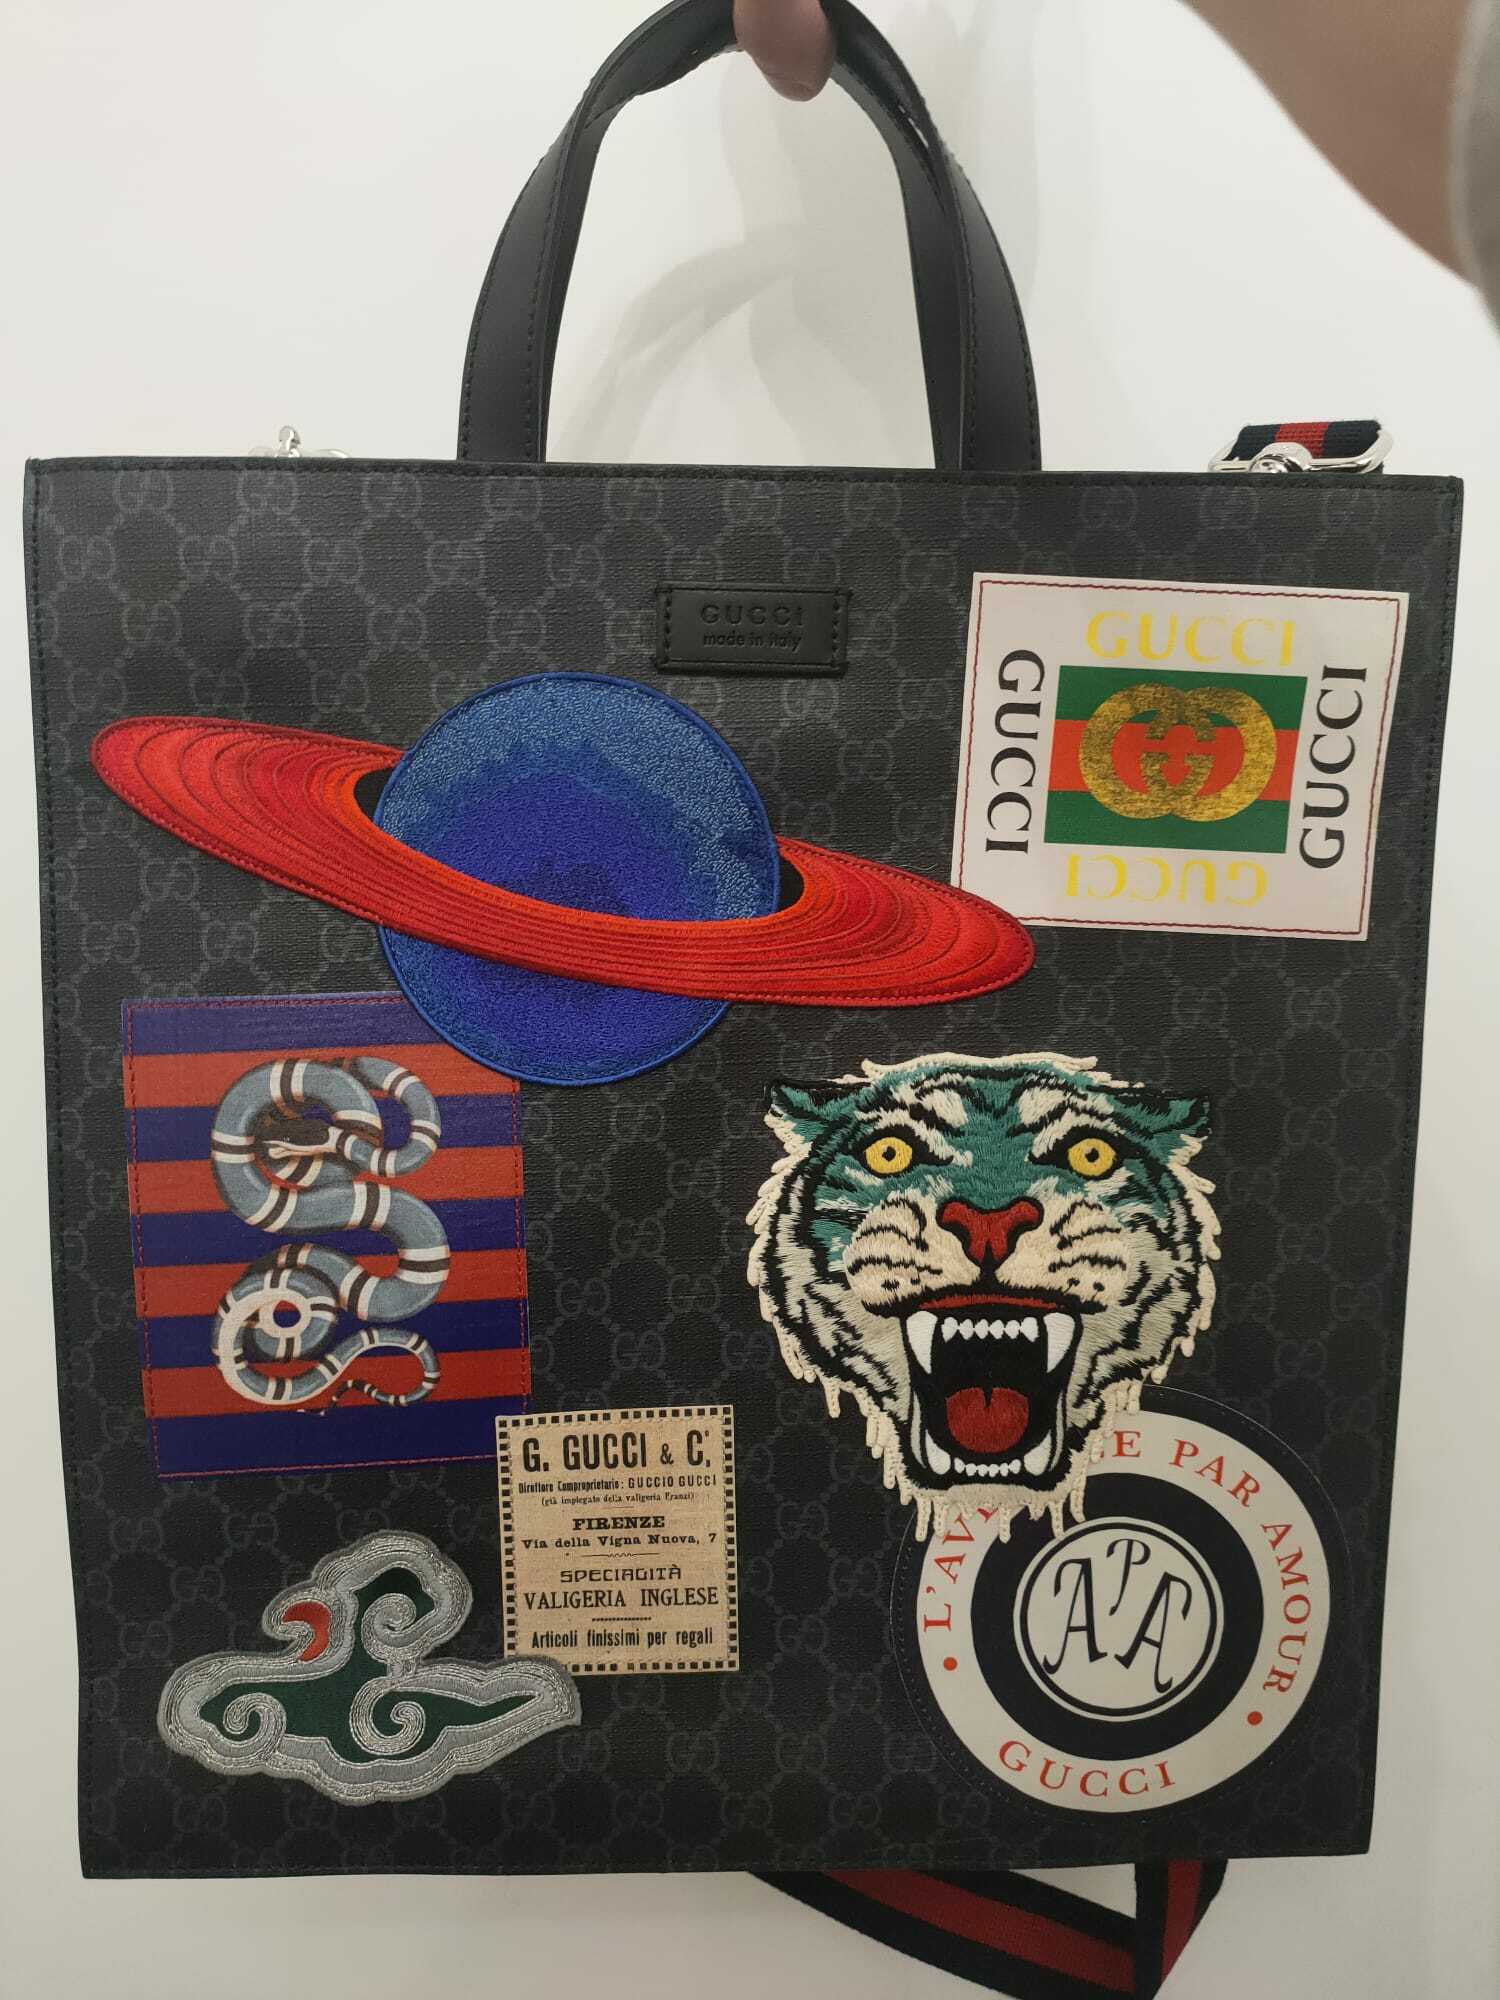 GUCCI TOTE BAG WITH TIGER LOGO AND STRAP AND ZIPPER